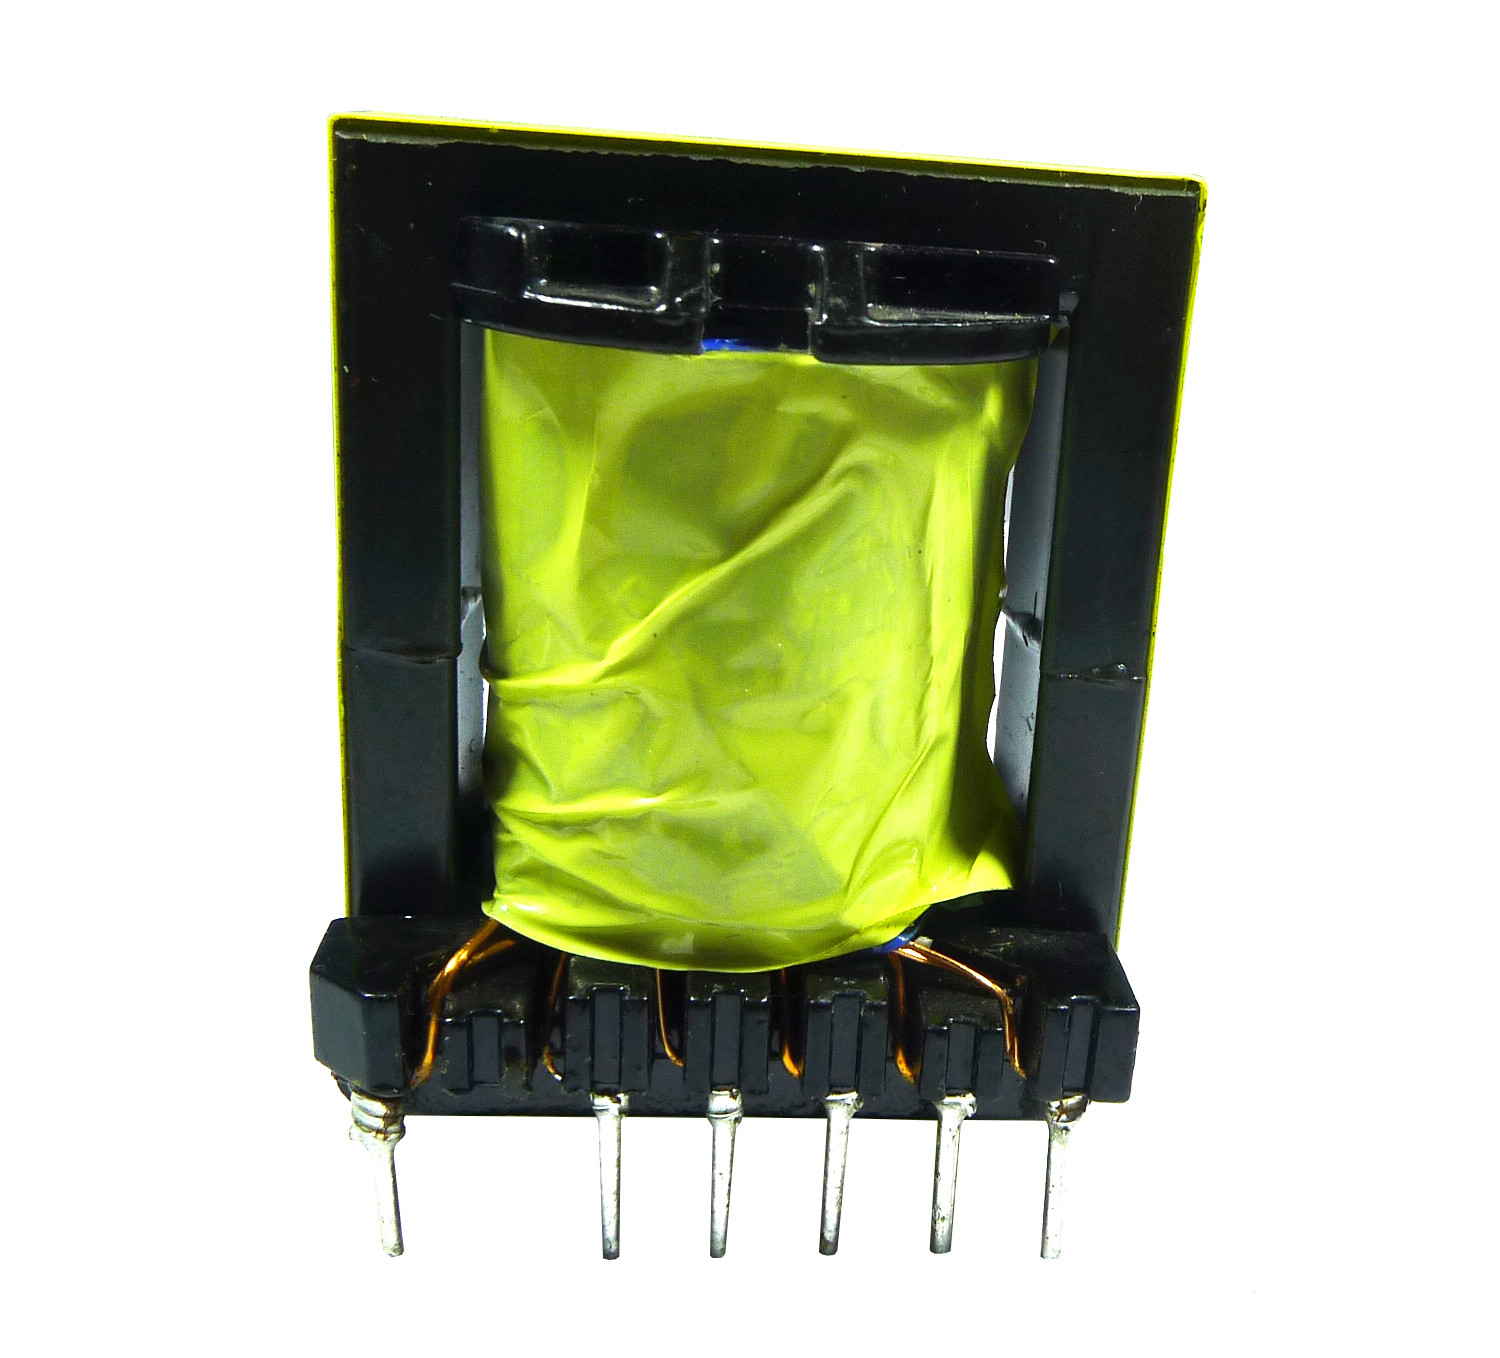  PZ-ER35 1100uH vertical Safety high frequency Stable 40 ferrite material Applied to industrial power supplies Manufactures